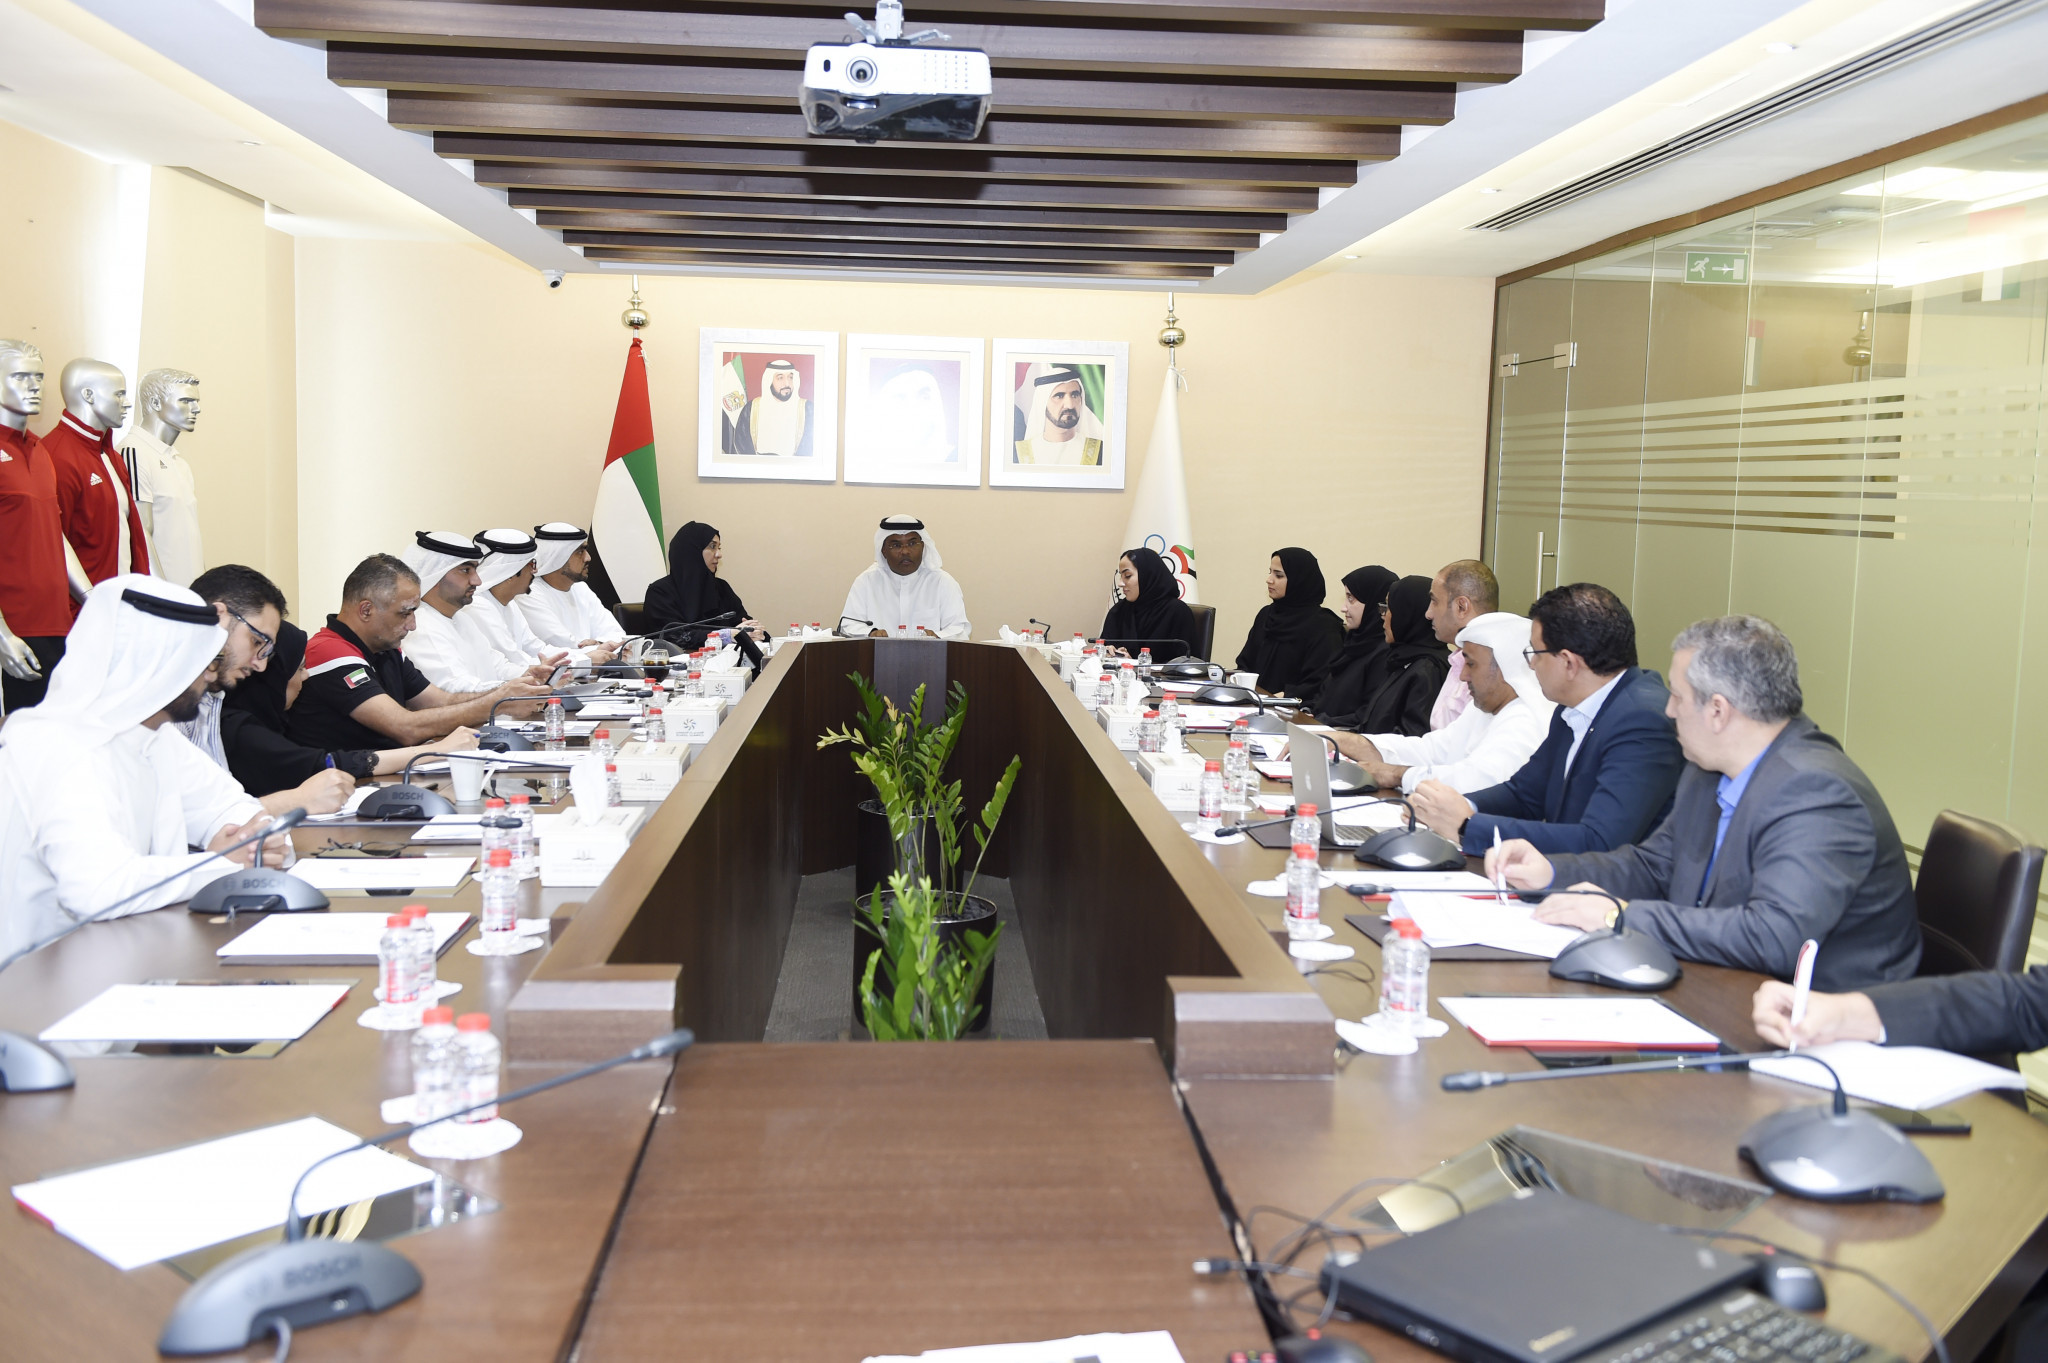 The United Arab Emirates National Olympic Committee are preparing for the Women's Sports Games in Kuwait ©UAE NOC